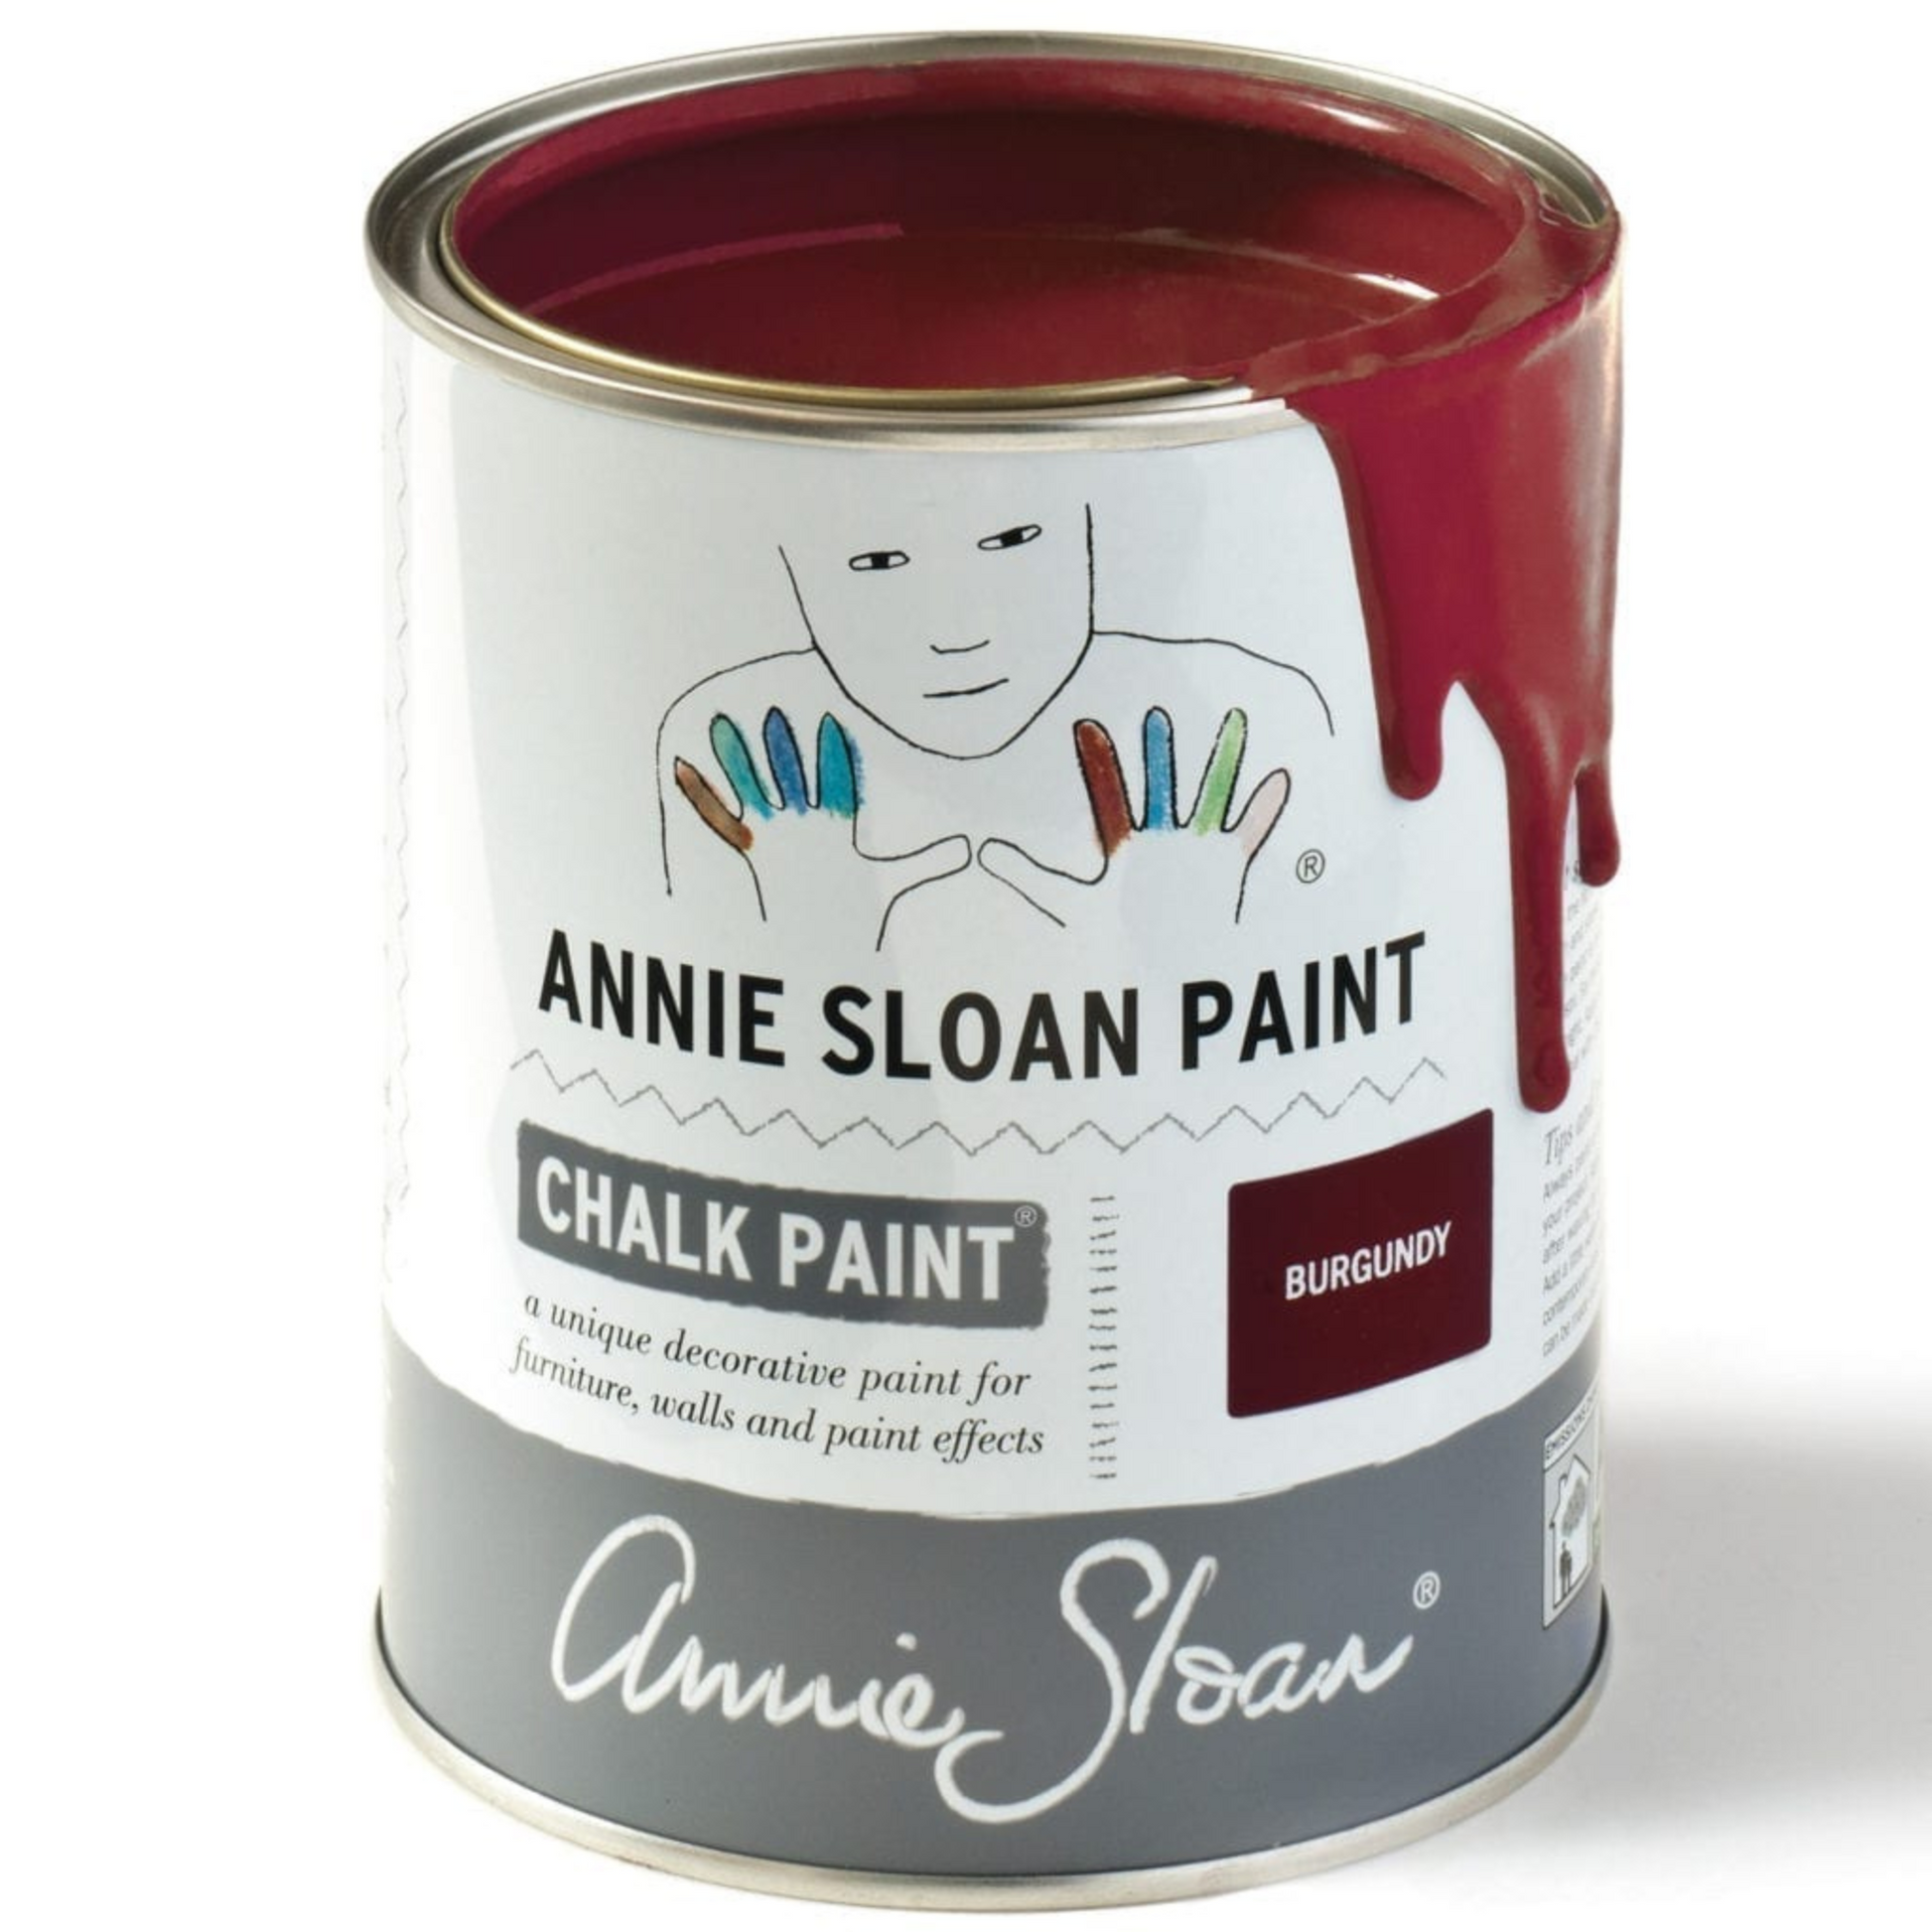 Can of Burgundy Annie Sloan Chalk Paint.